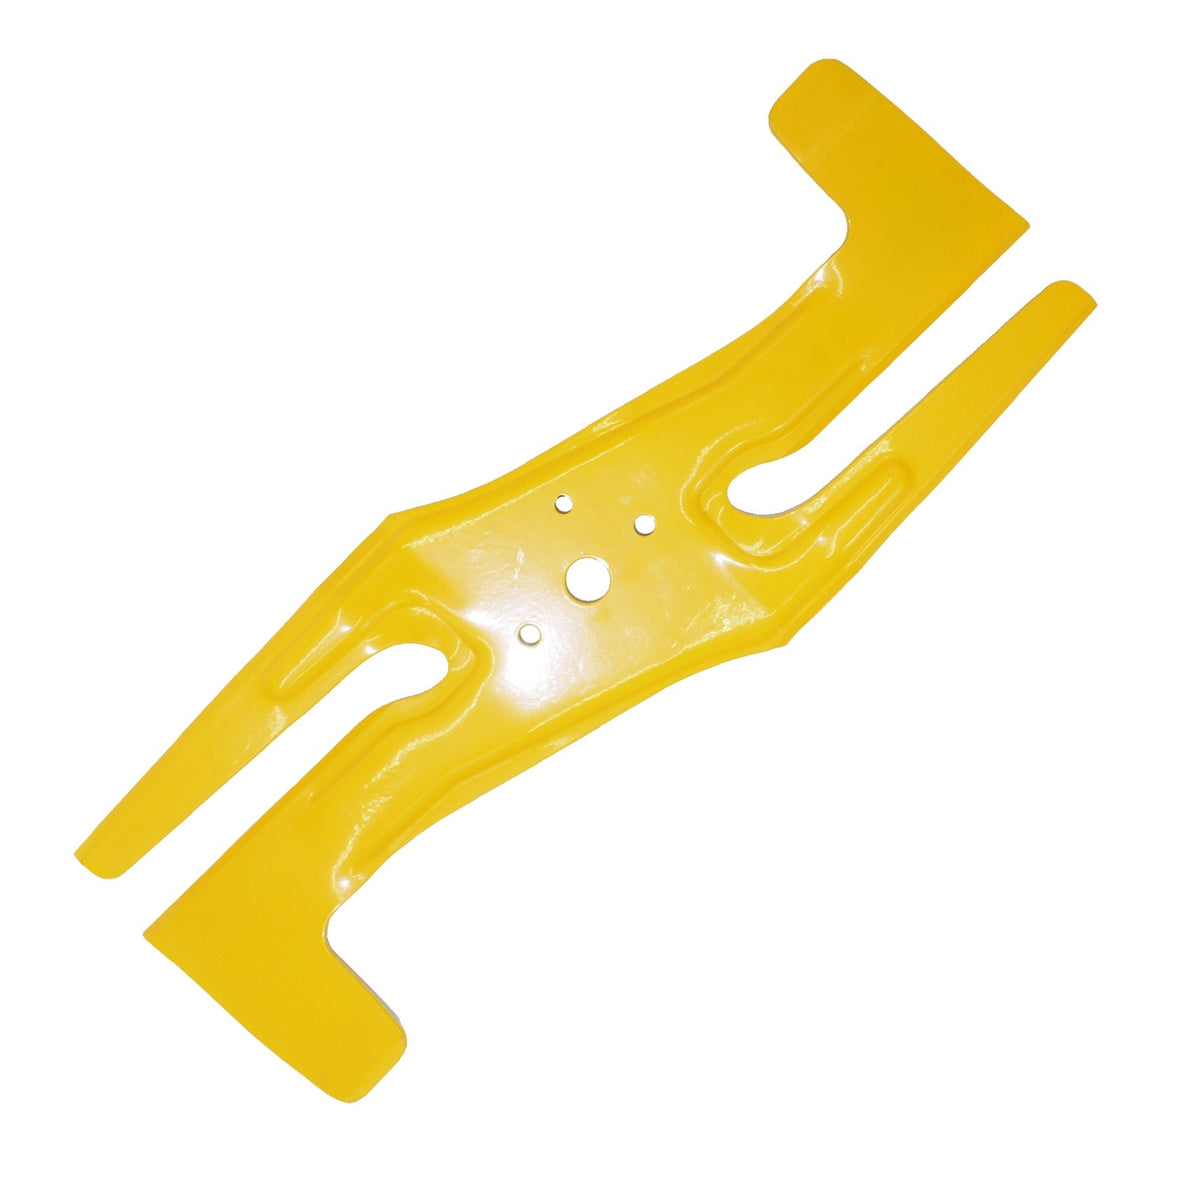 Stiga / Mountfield Parts - TWINCLIP BLADE 50 Part Number: 181004415/0